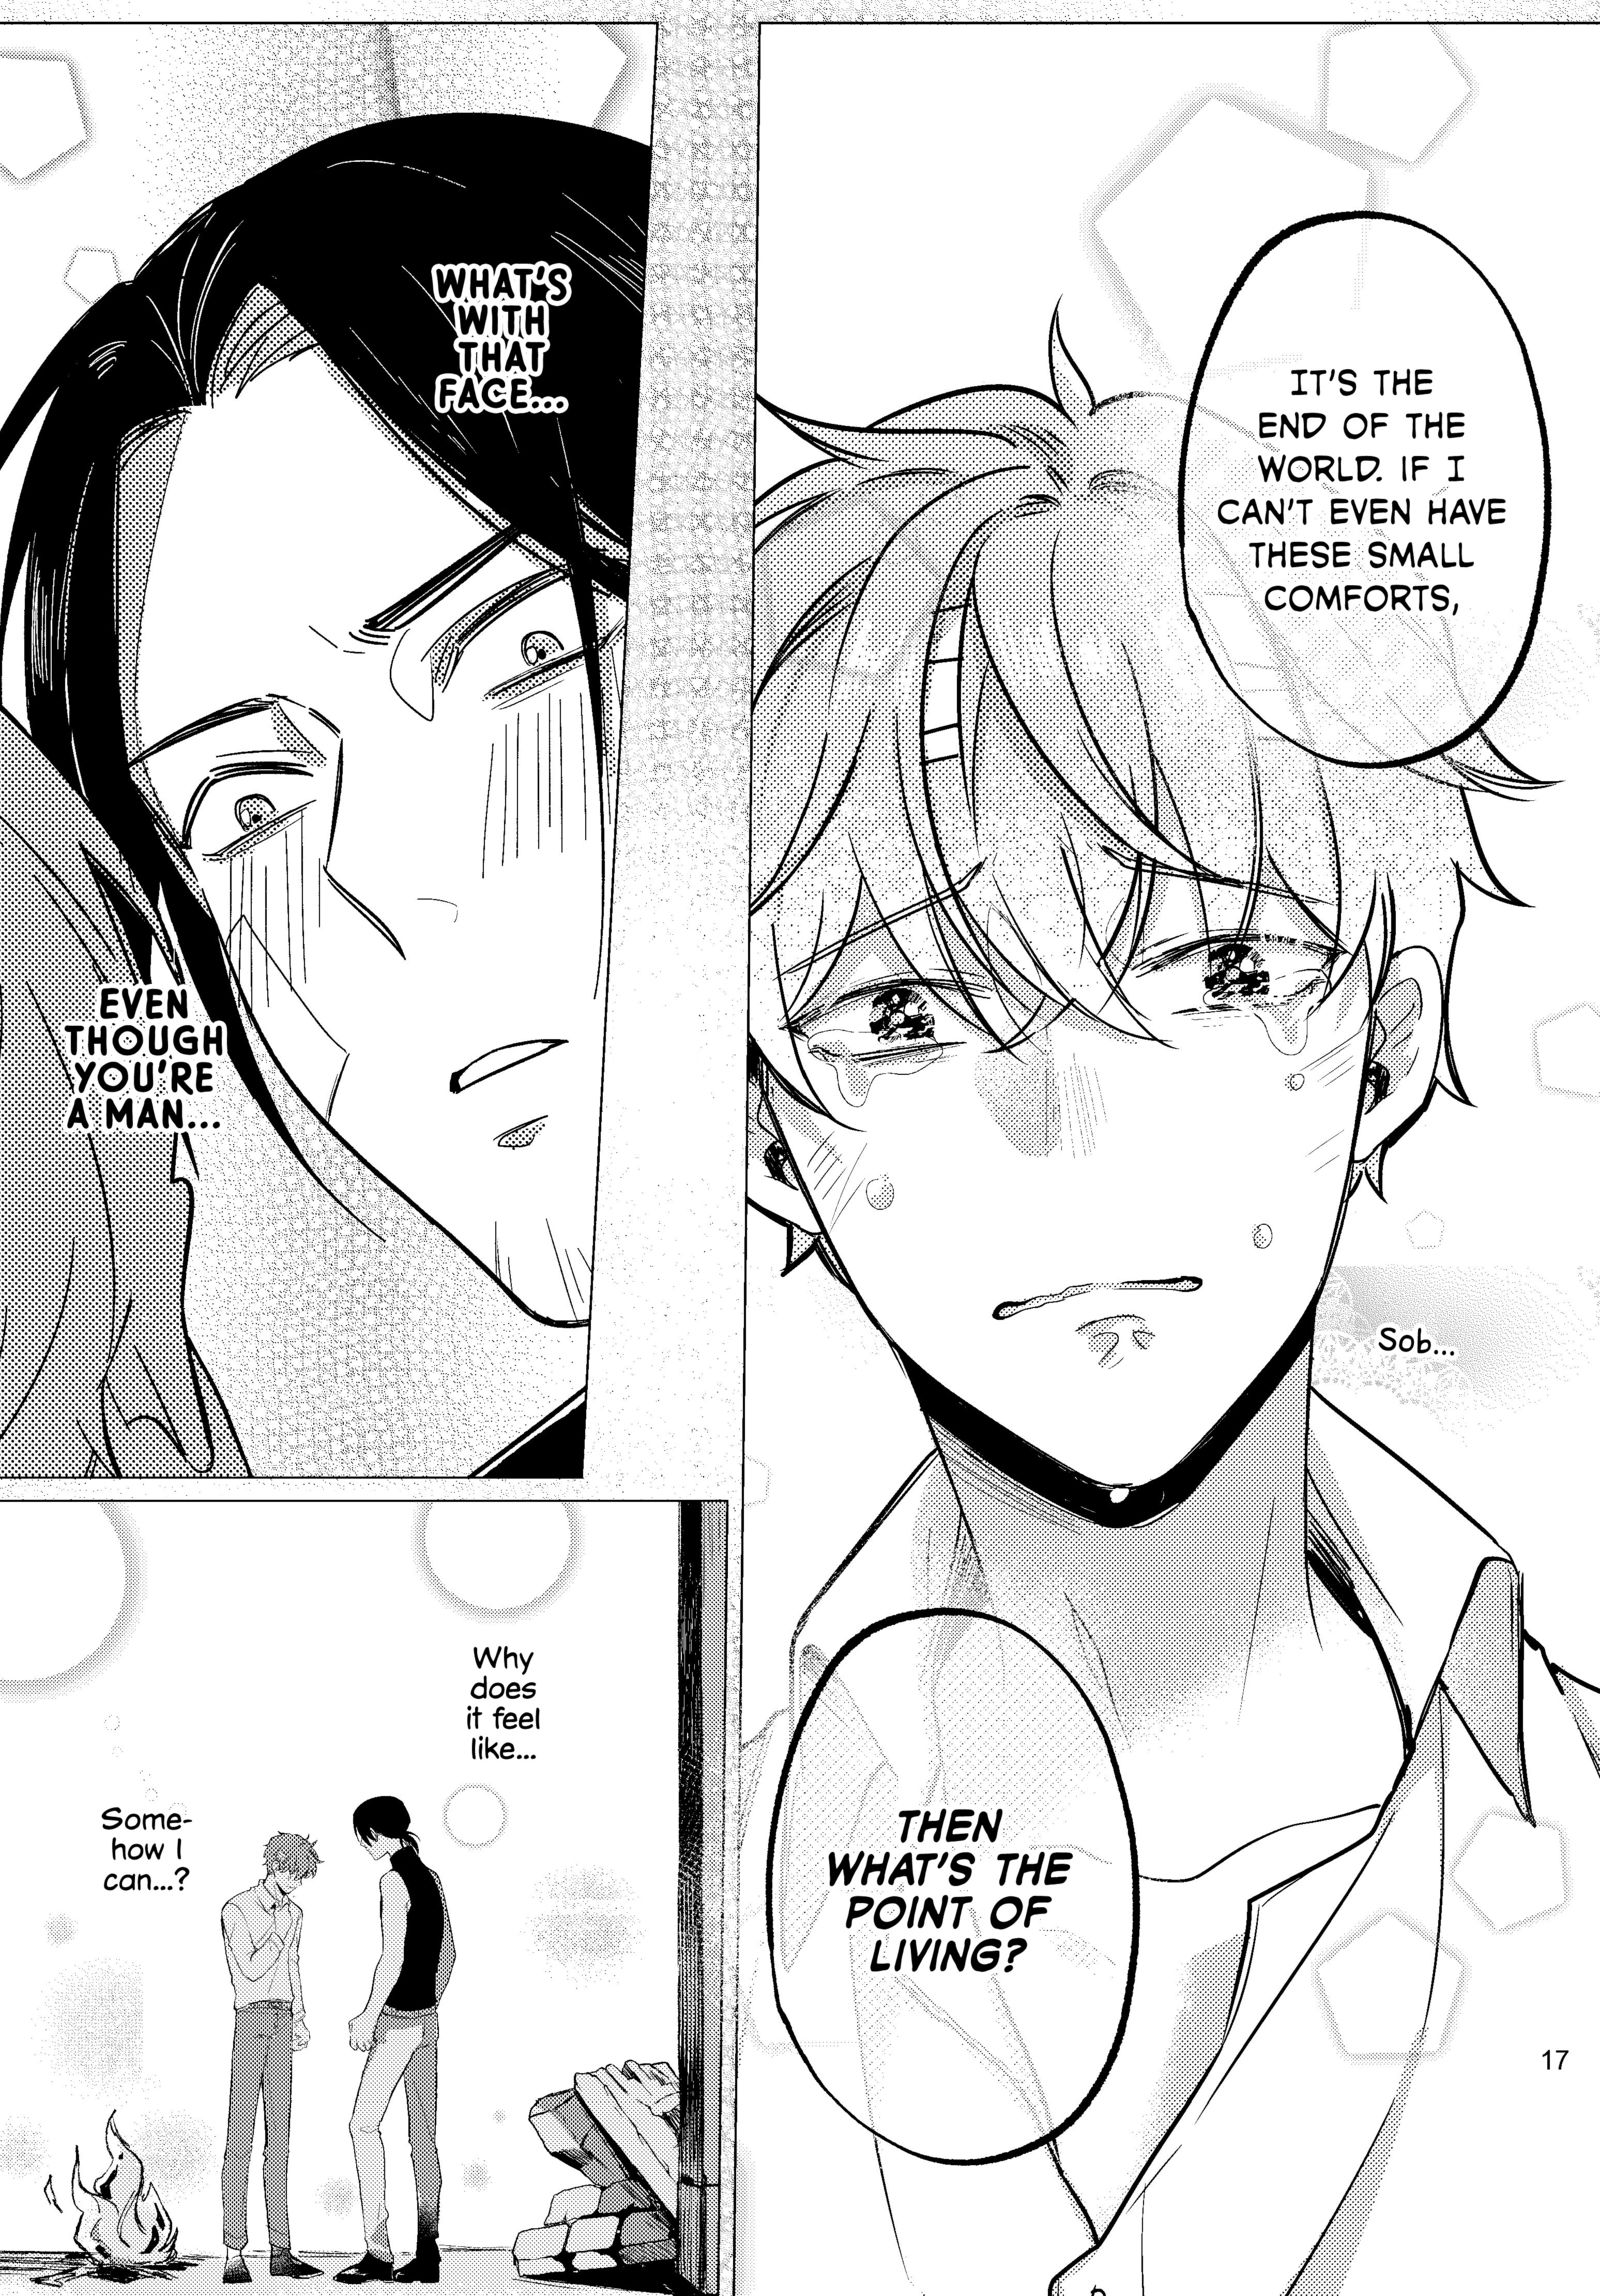 At the end of the world, I still want to be with you vol.1 ch.1